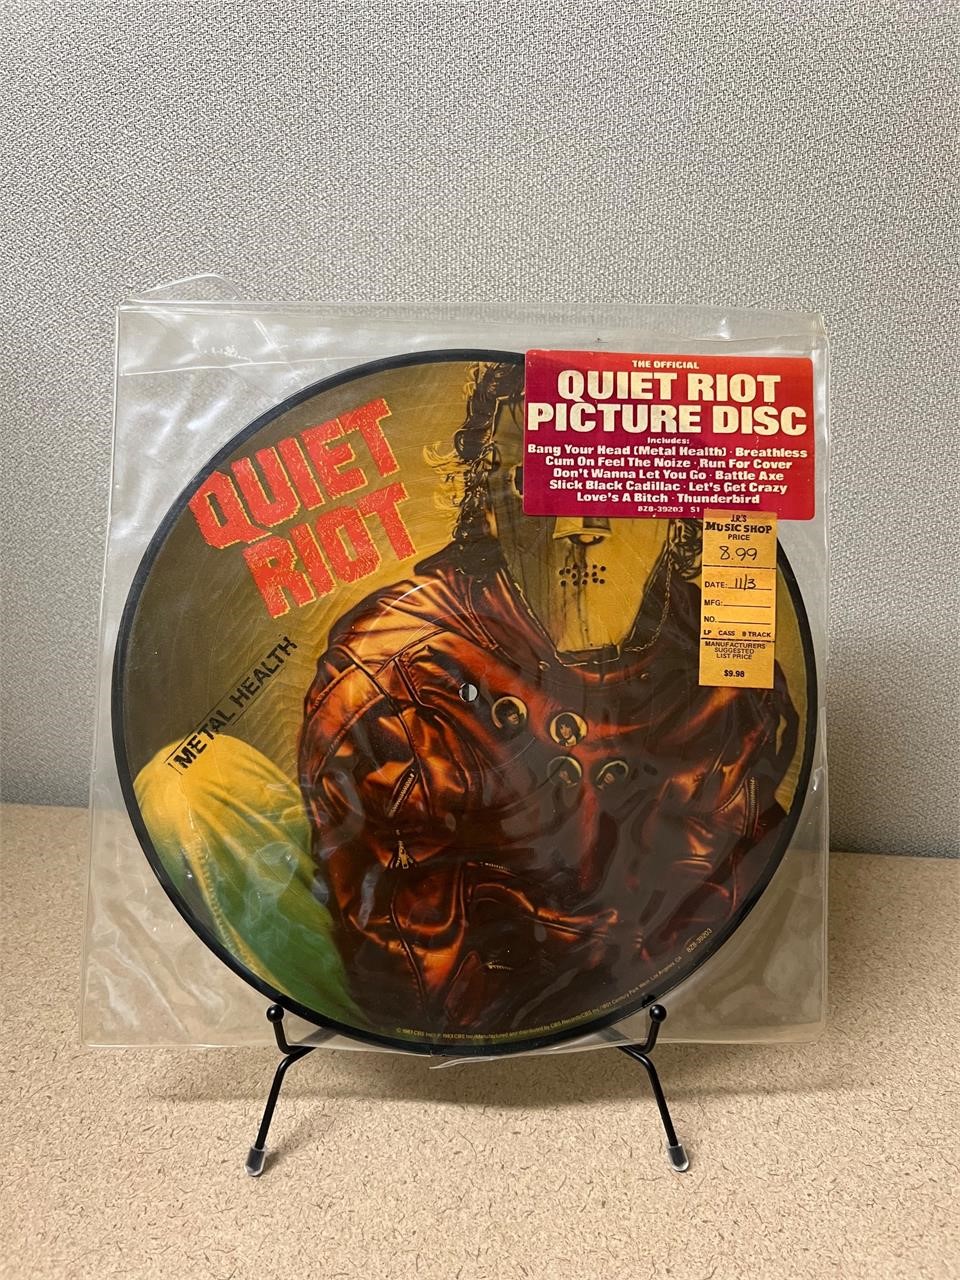 Quiet Riot Picture Disk Collectible Vinyl Record